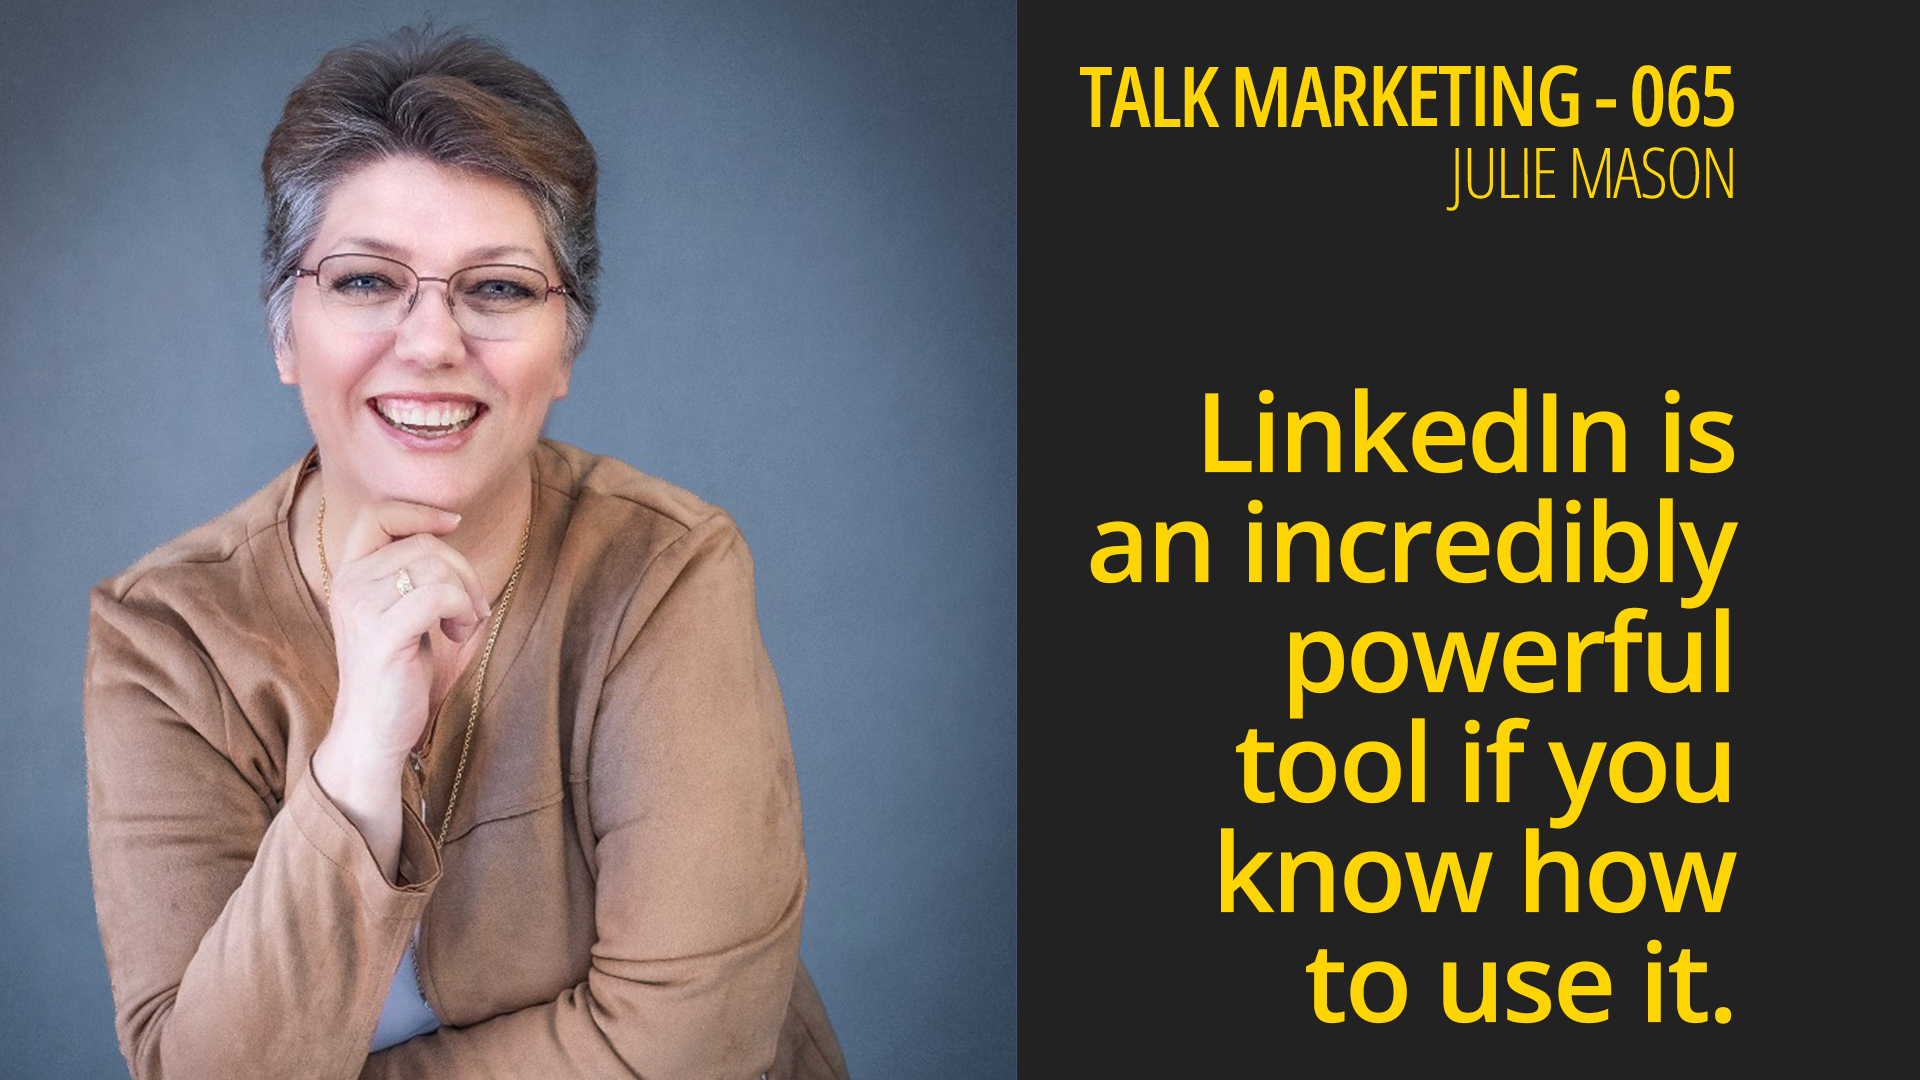 LinkedIn is an incredibly powerful tool if you know how to use it – Talk Marketing 065 – Julie Mason